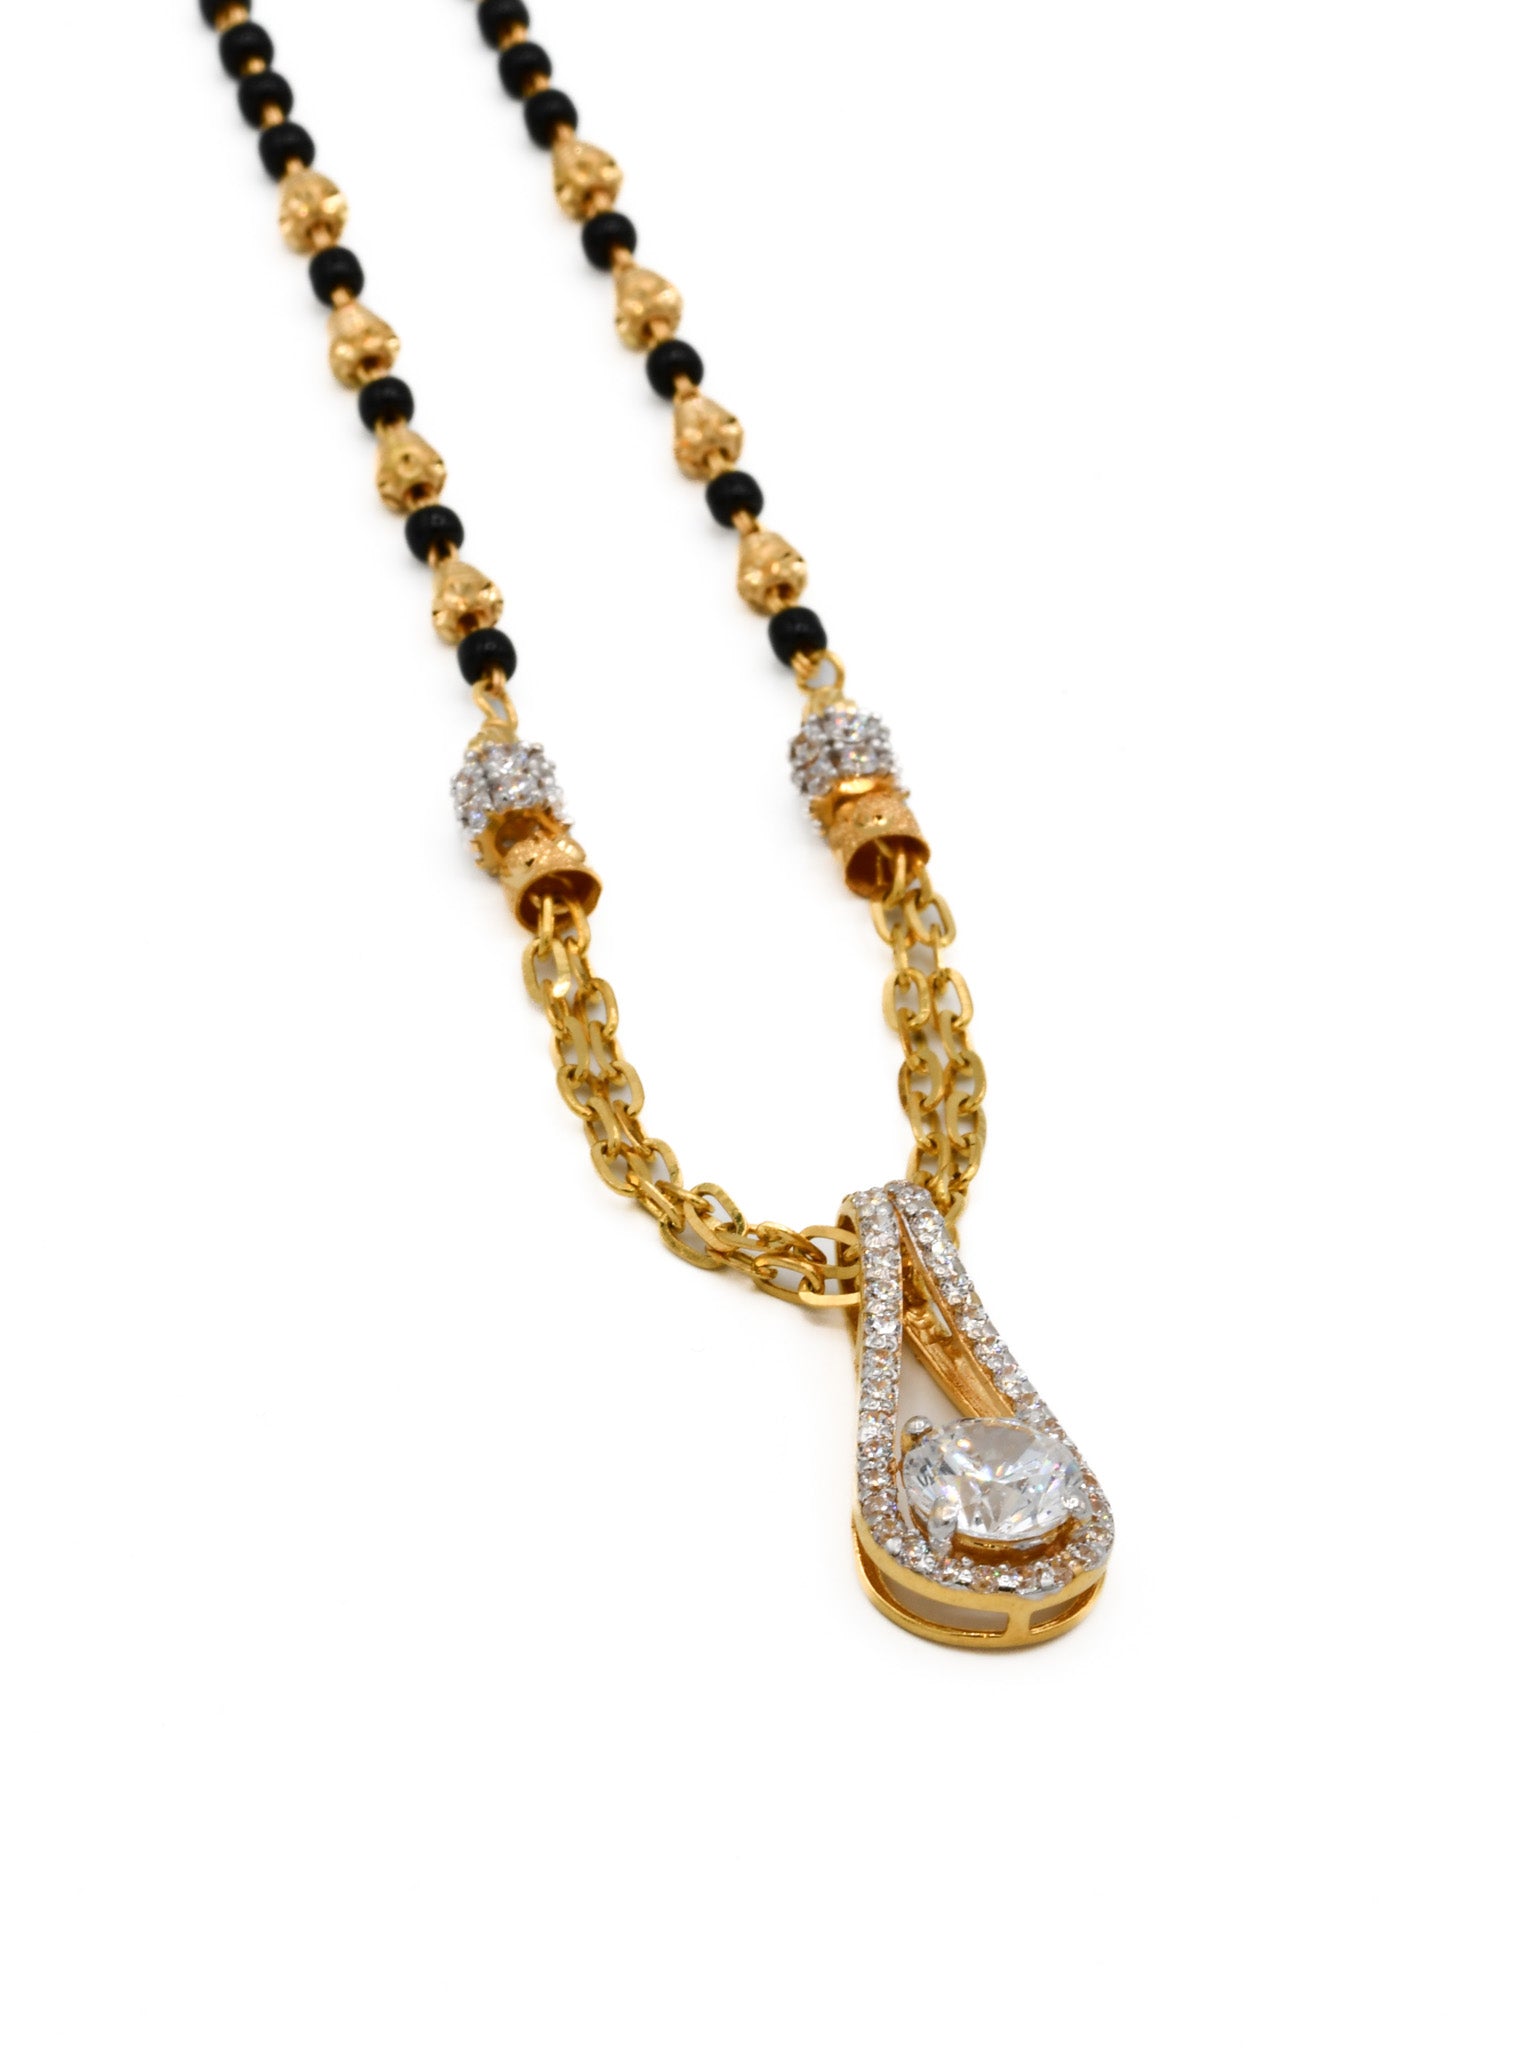 22ct Gold CZ Mangal Sutra - Roop Darshan